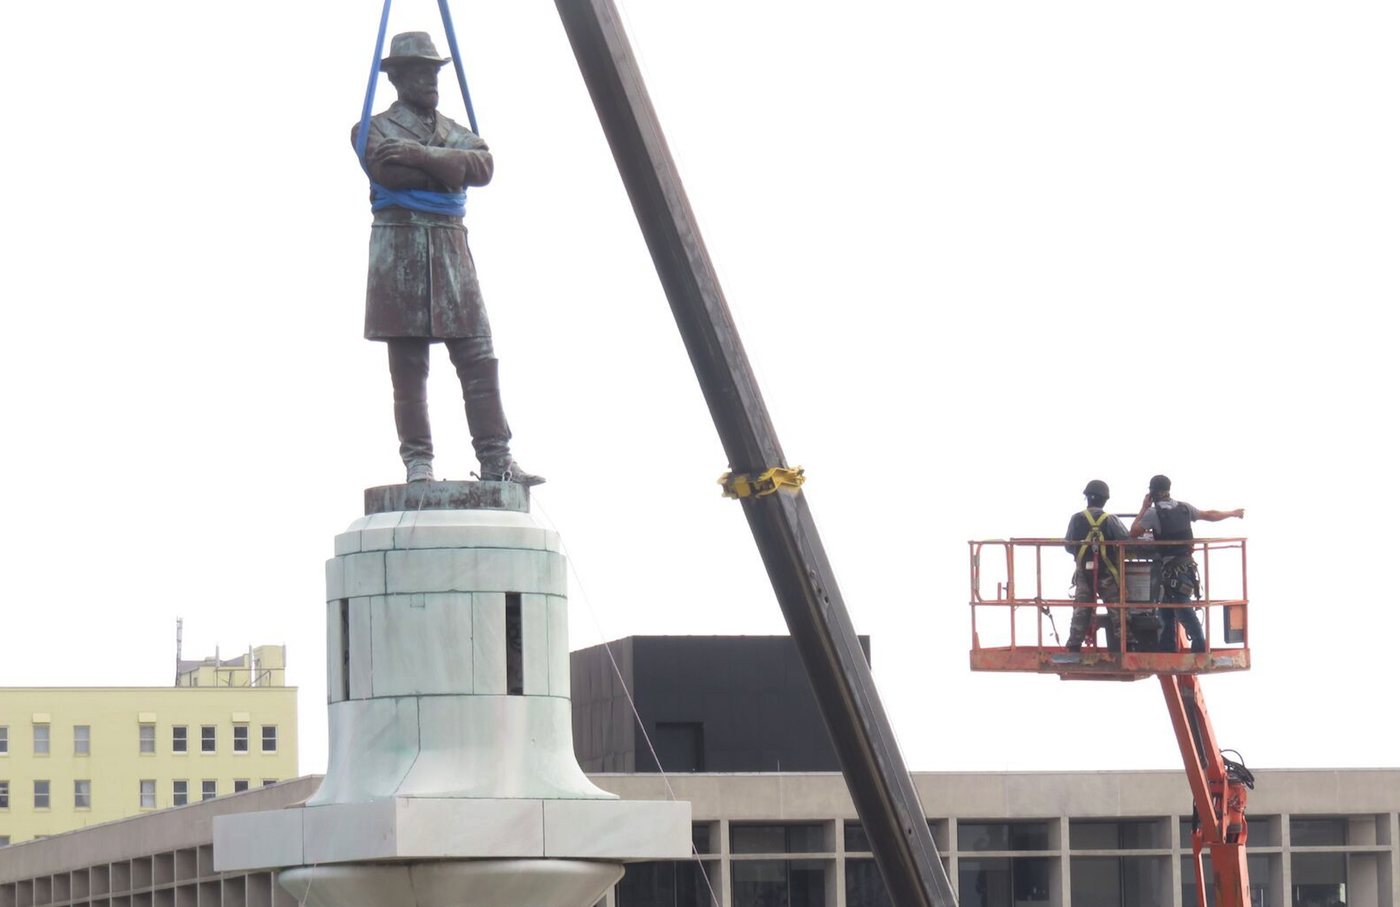 Removing the Confederate Monuments In New Orleans Was Only a First Step Toward Righting the Wrongs of History